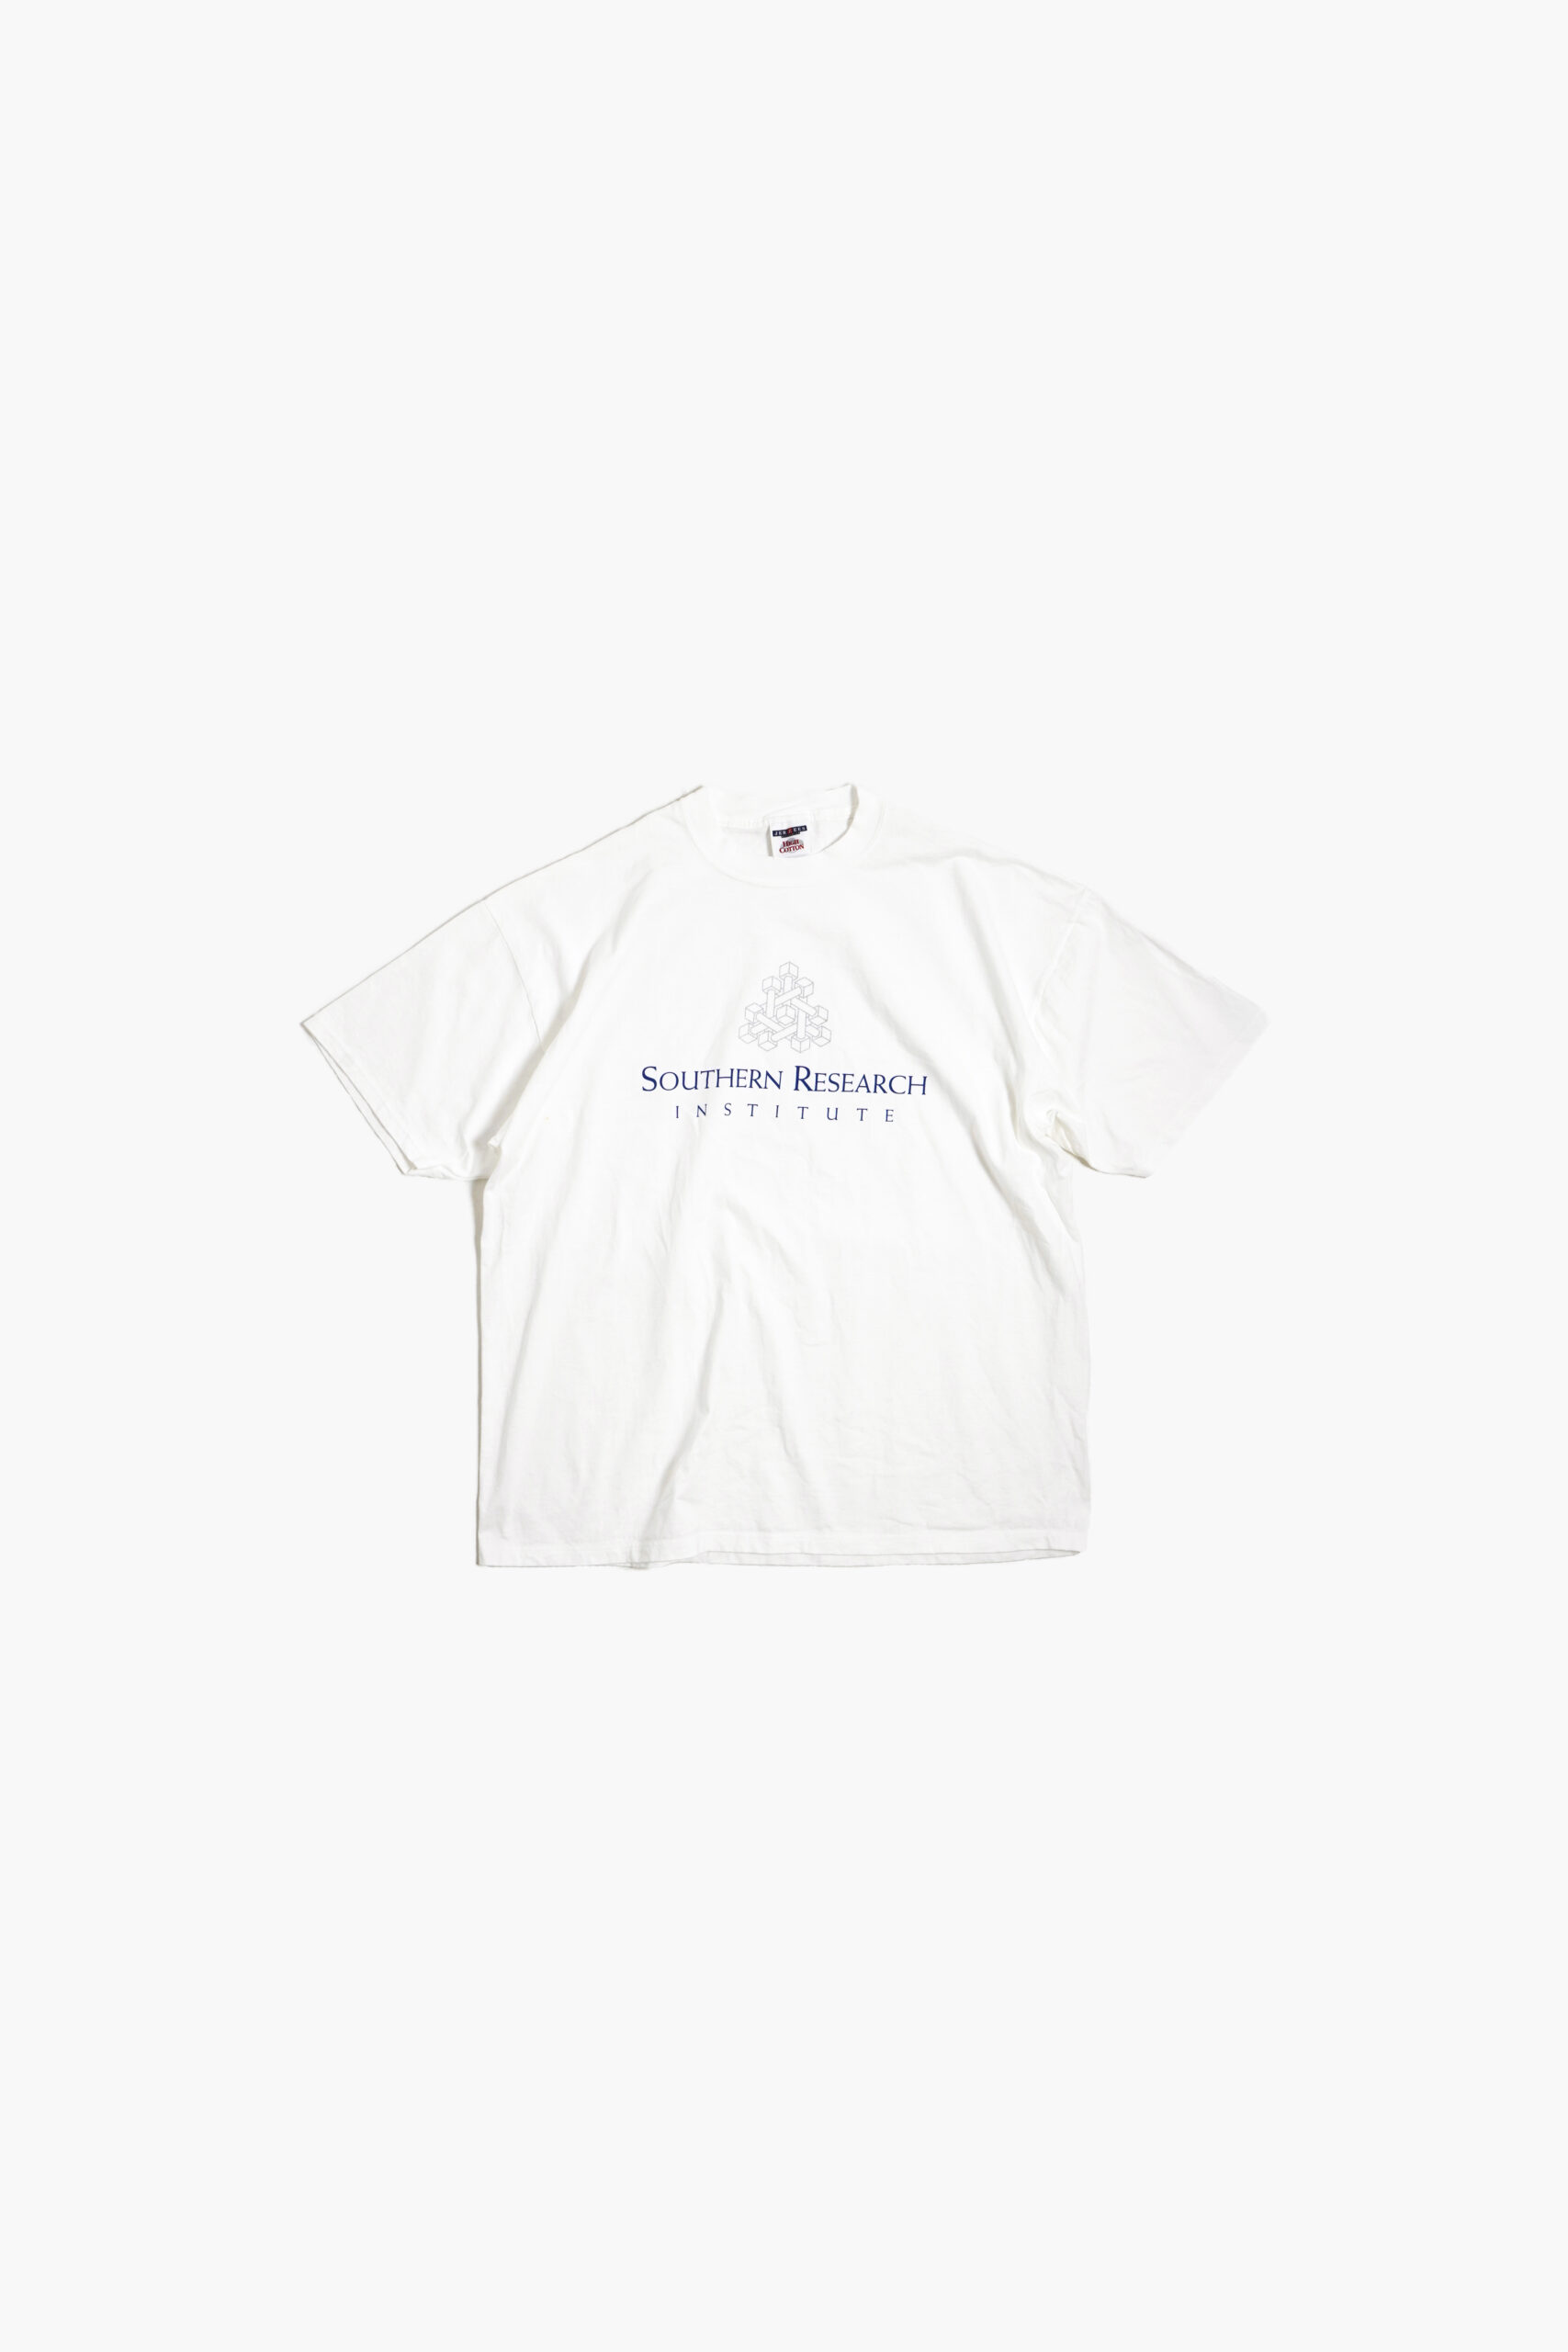 SOUTHERN RESERCH PRINTED TEE